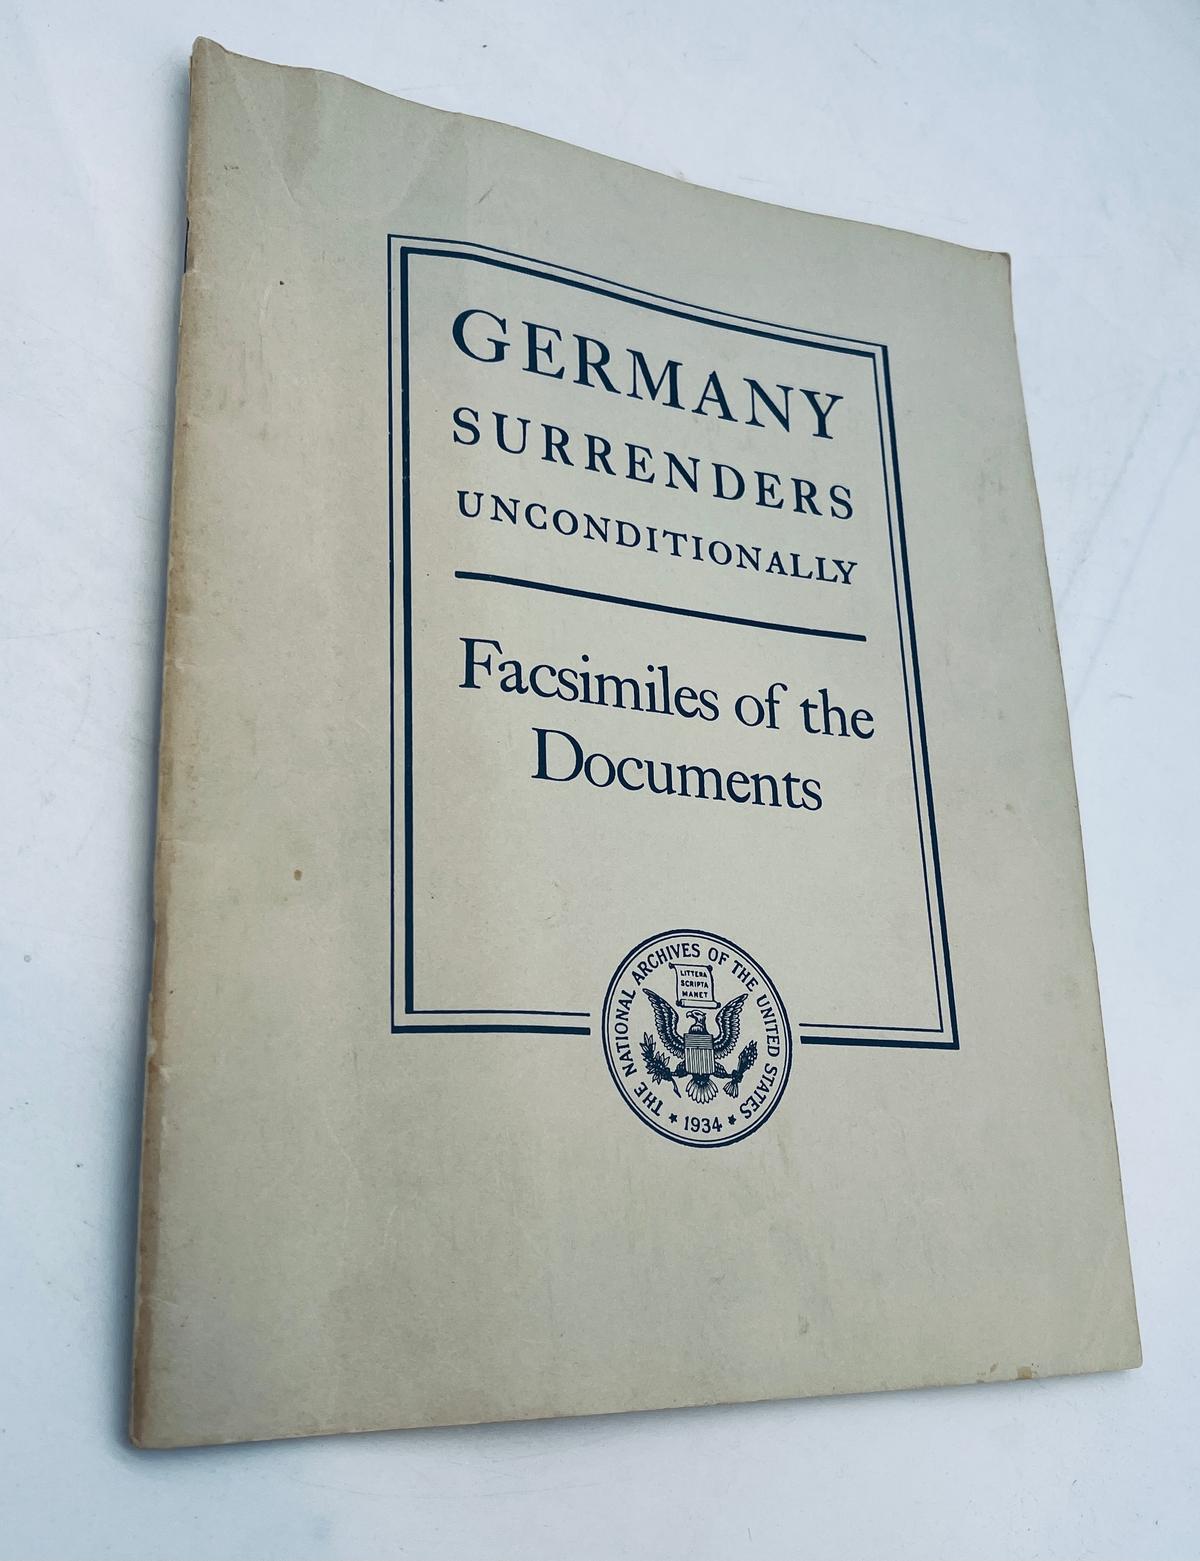 GERMANY SURRENDERS Unconditionally; Facsimiles of the Documents (1945)